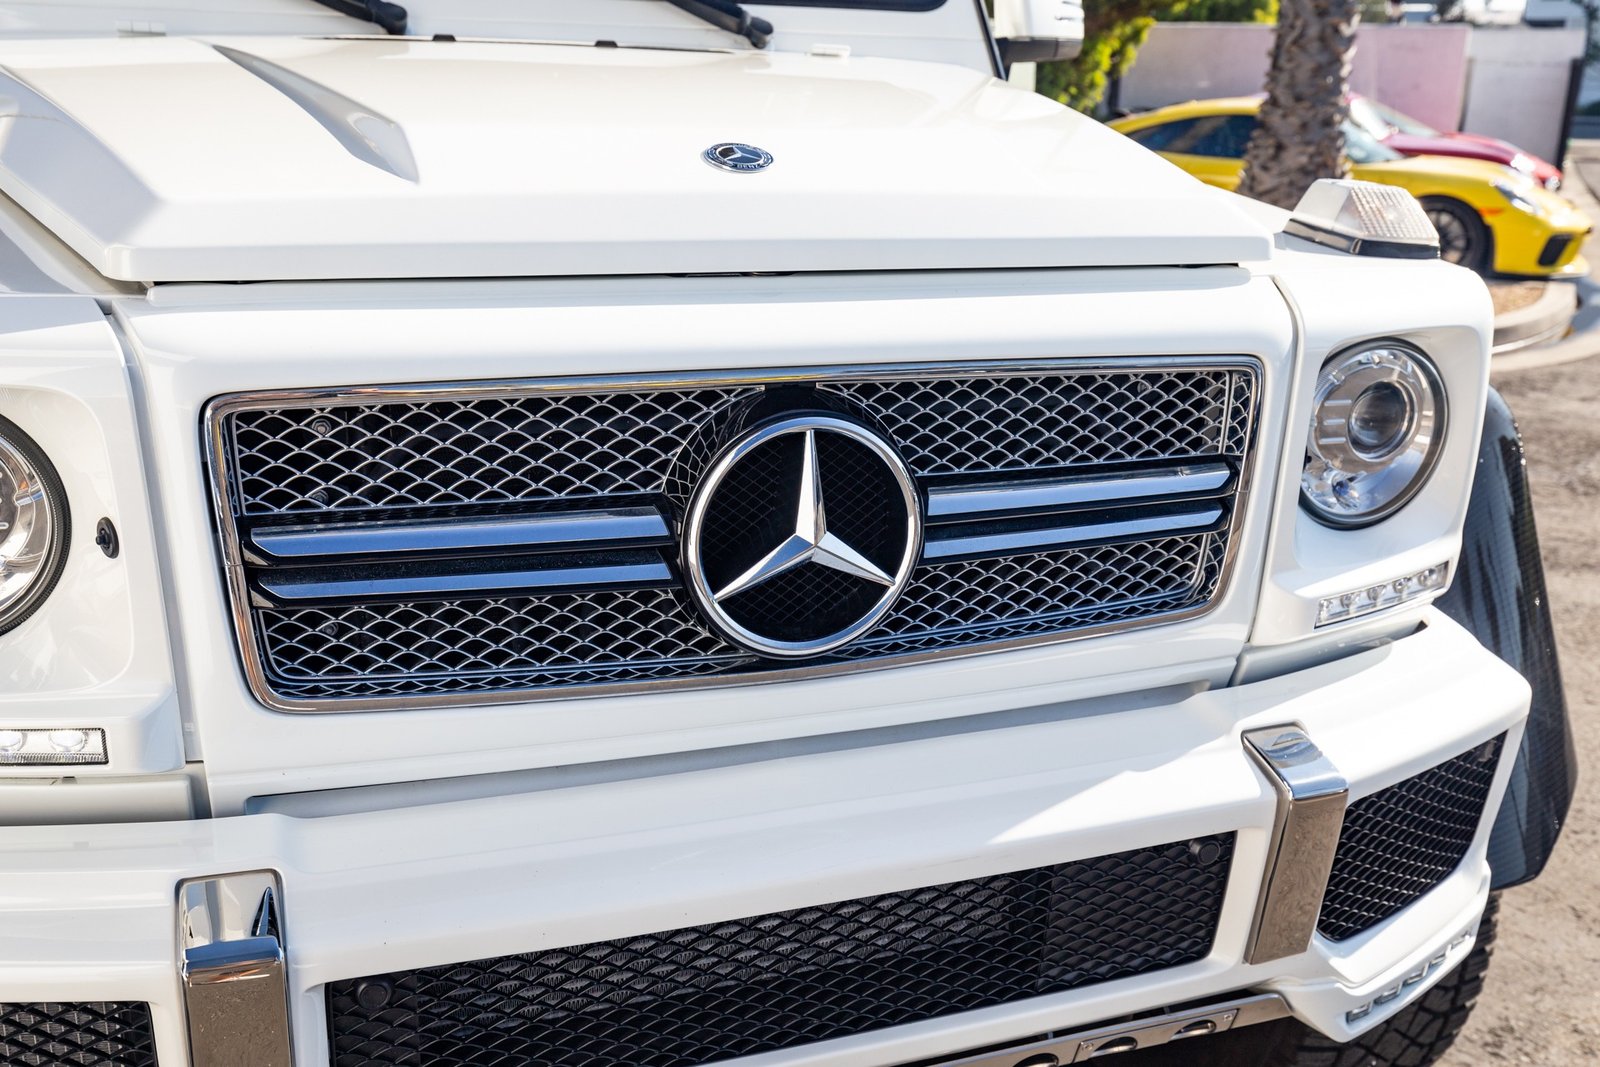 Used 2018 Mercedes-Benz G650 Maybach (86)